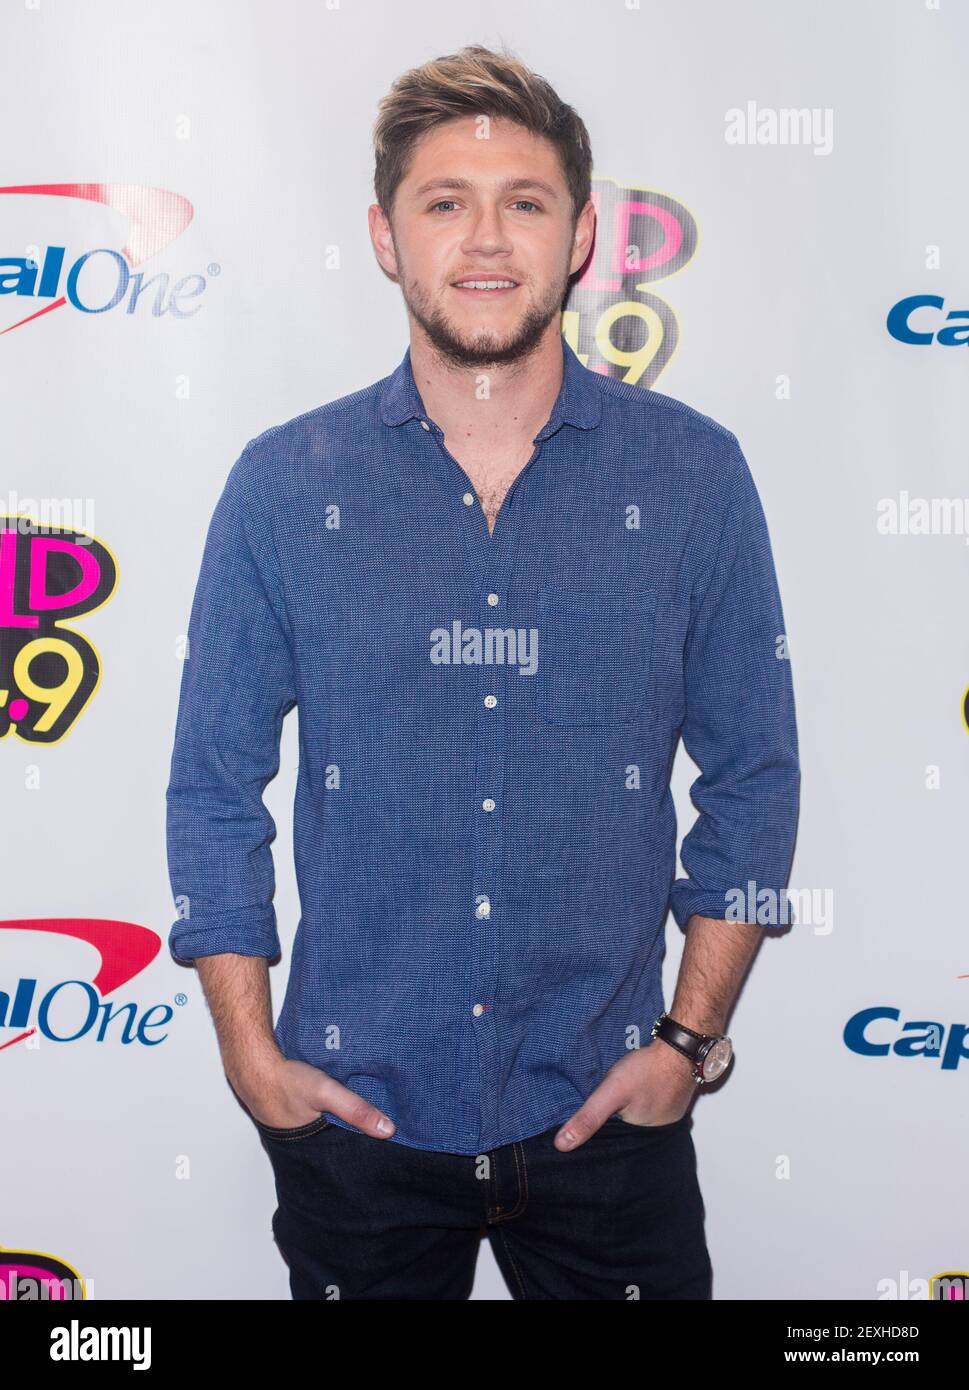 Recording artist Niall Horan poses in the press room during the WiLD 94.9 iHeartRadio Jingle Ball at SAP Center on December 1, 2016 in San Jose, California(Photo by Chris Tuite/ImageSPACE) *** Please Use Credit from Credit Field *** Stock Photo